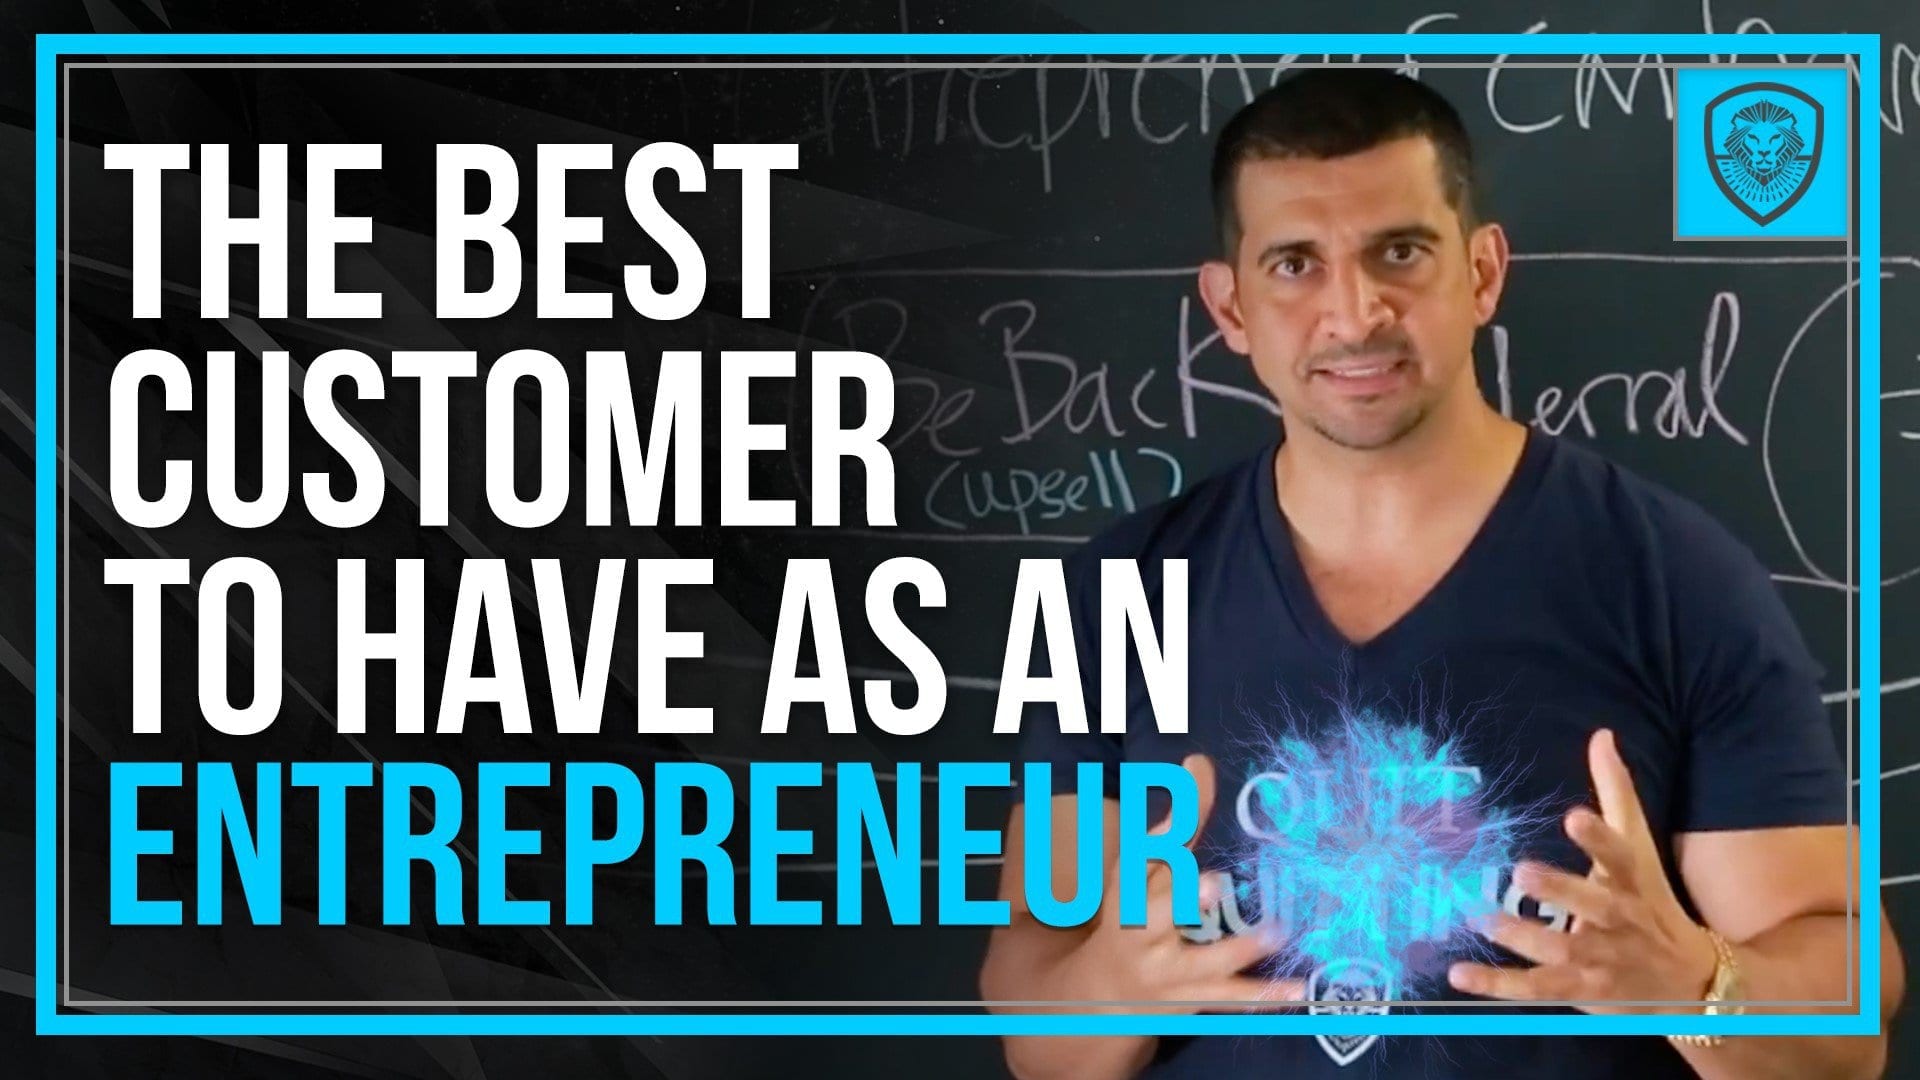 As an entrepreneur, do you constantly look for new customers? In this video I reveal the best customer you can have and how they keep your pipeline full.